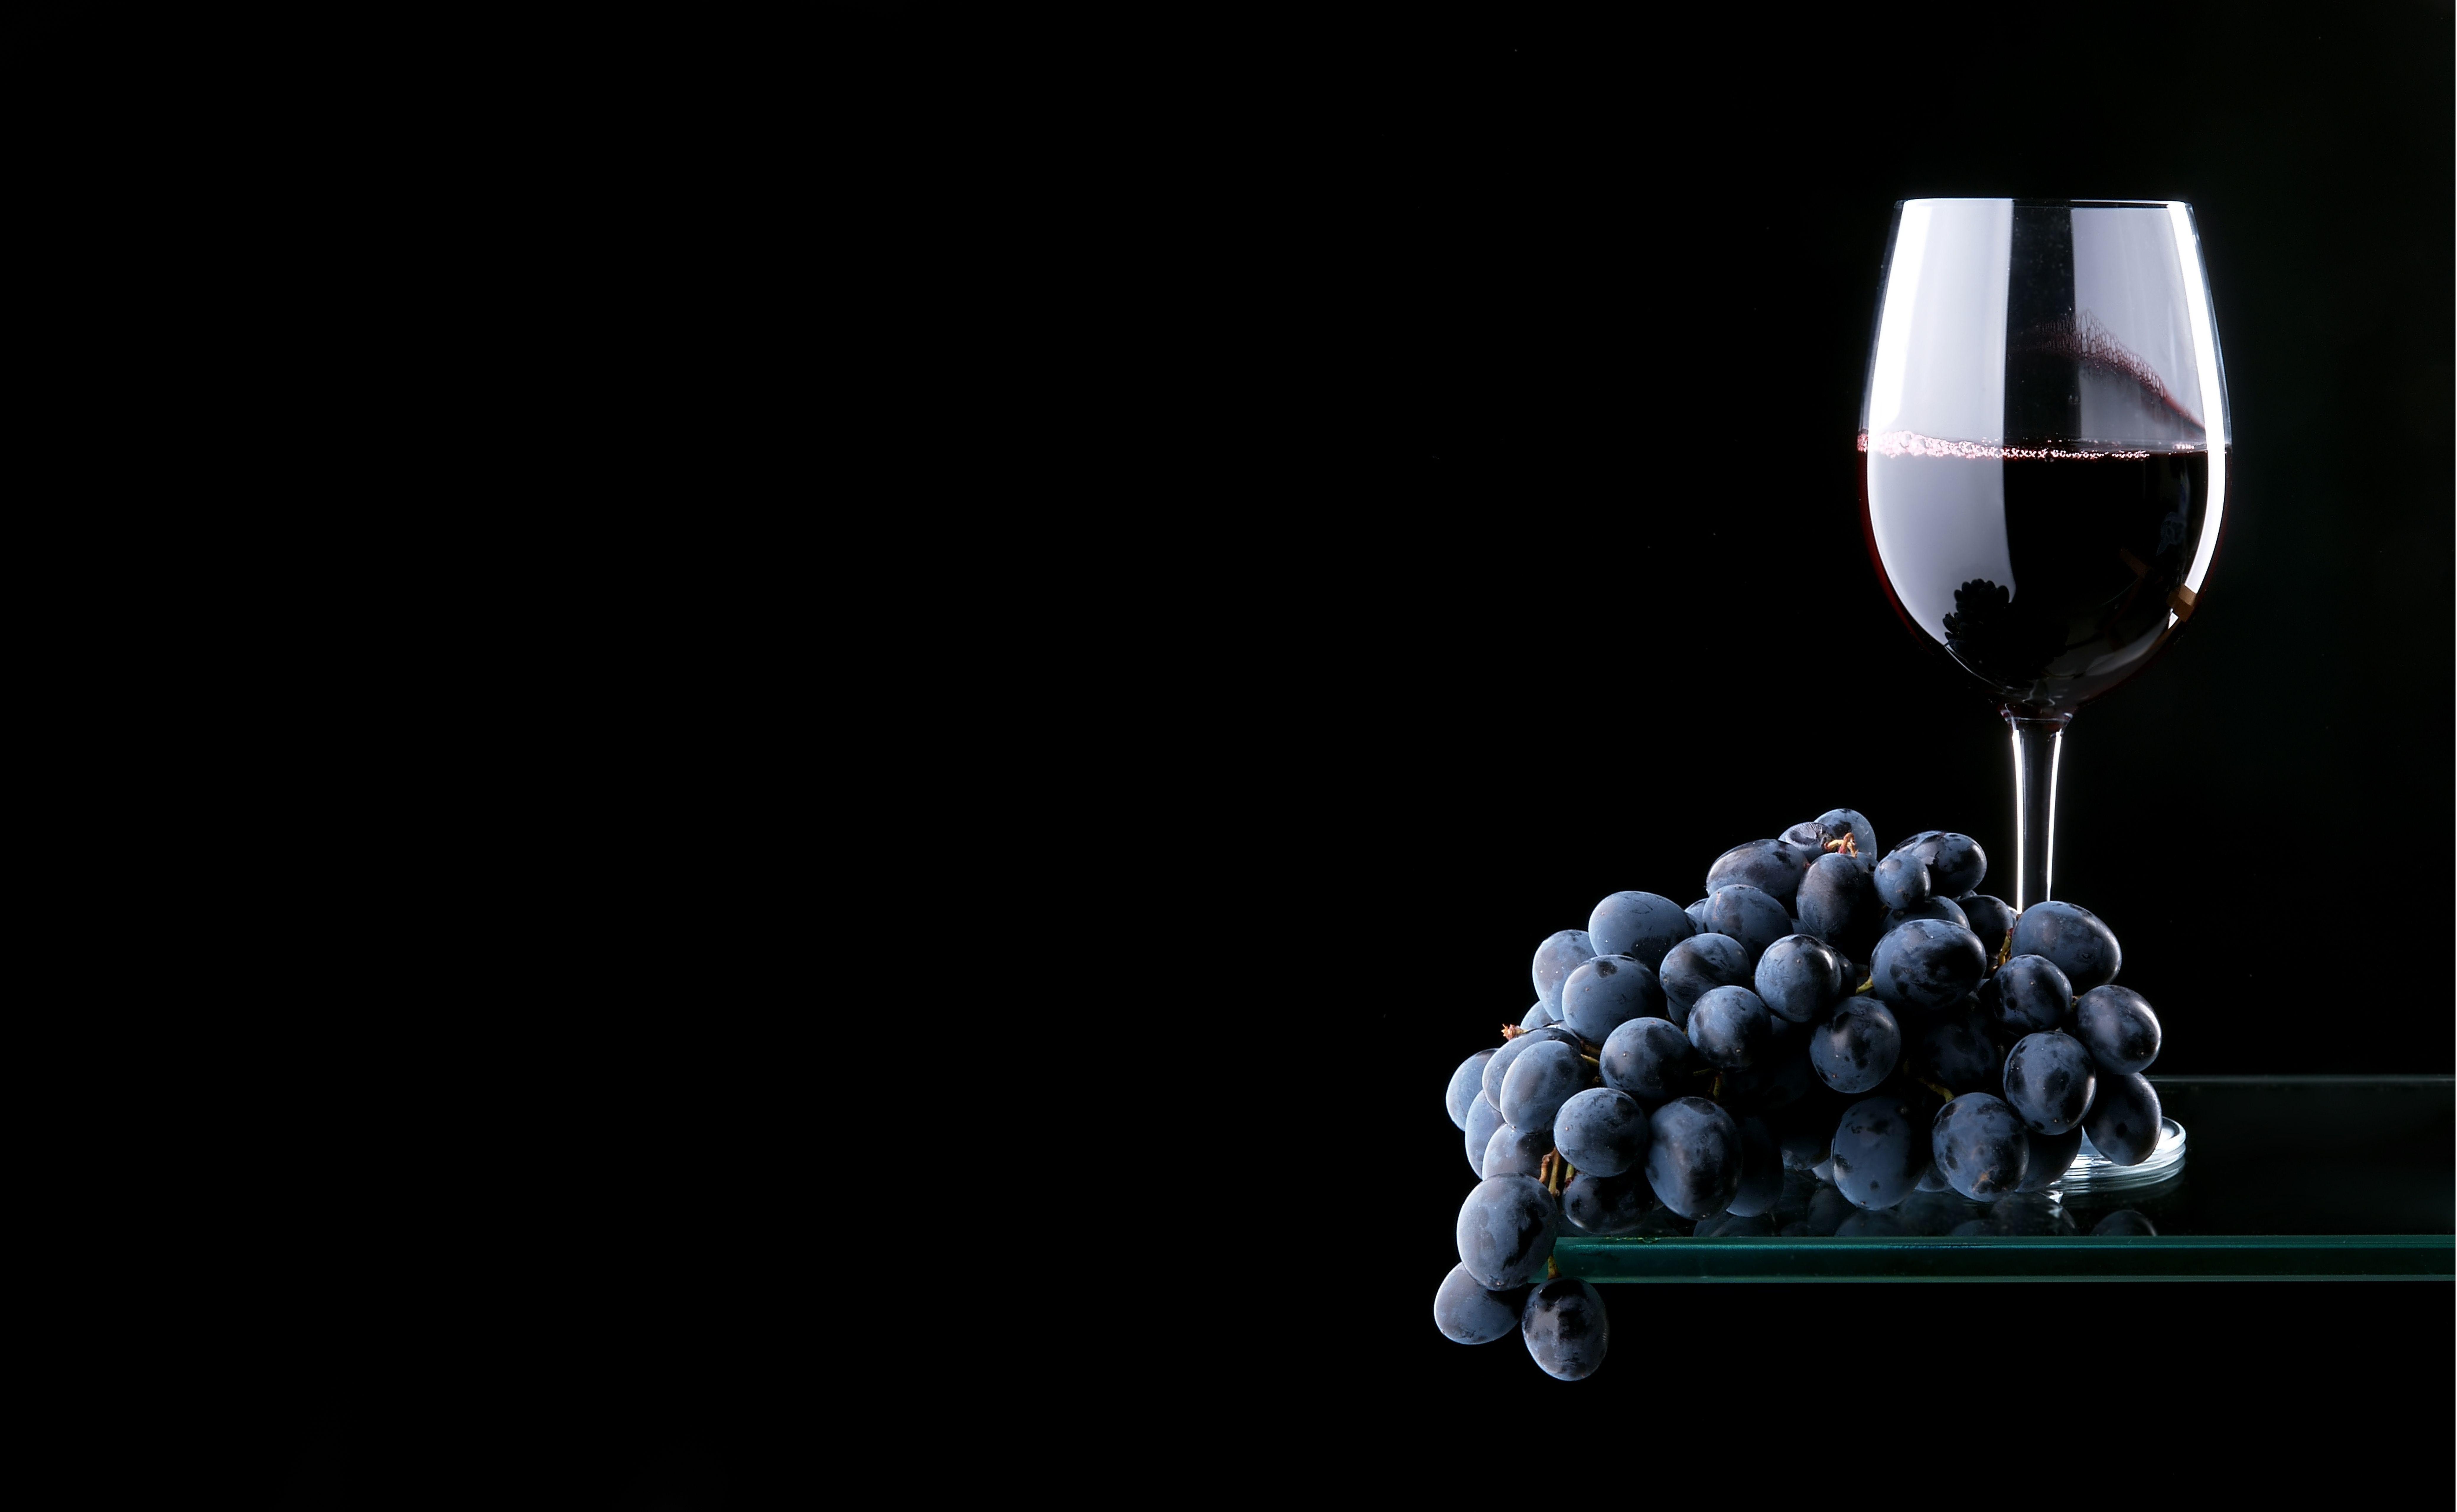 8319x5120px Wine and Grapes Wallpaper Border